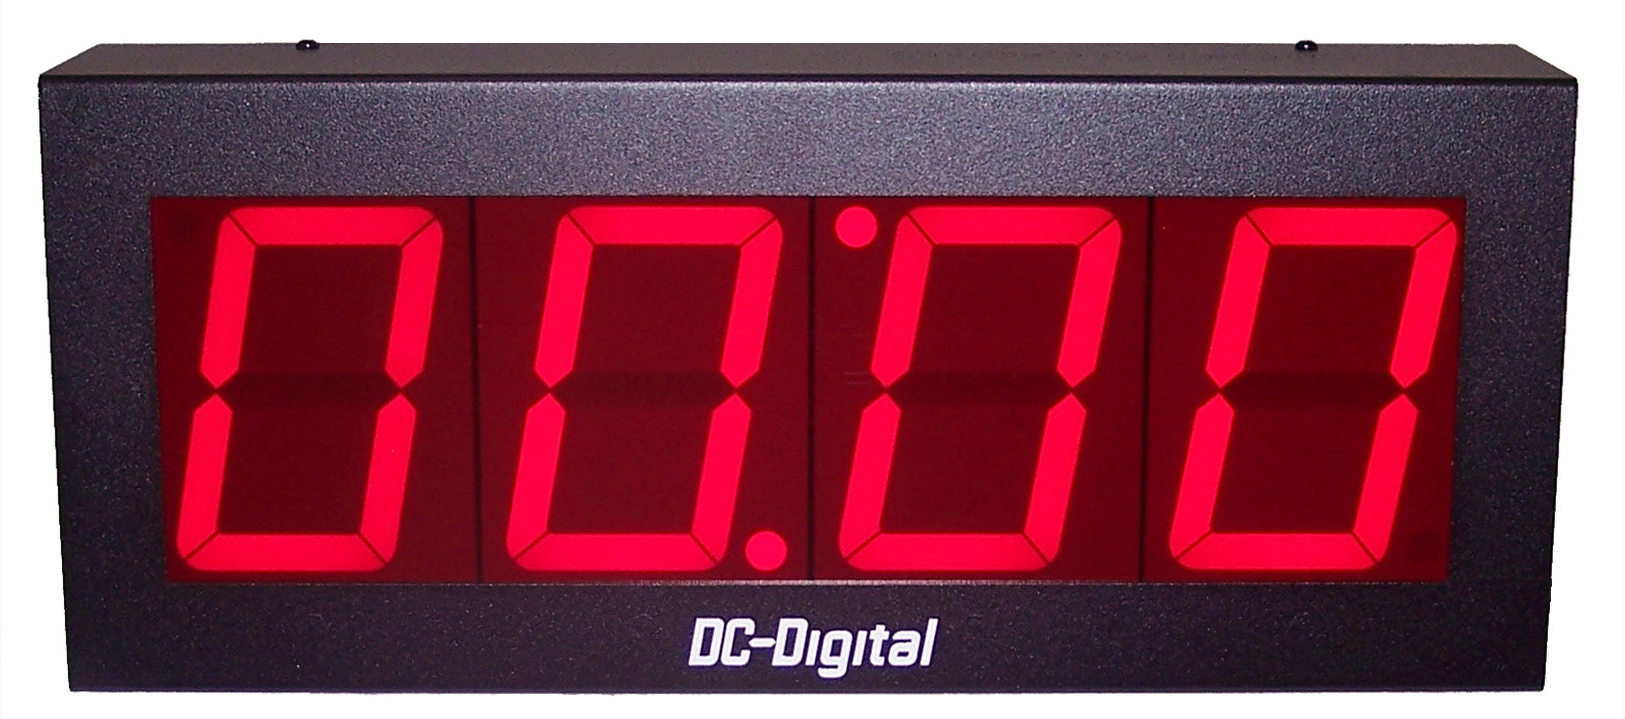 Static Number Display receives and displays only the numbers sent it through your network